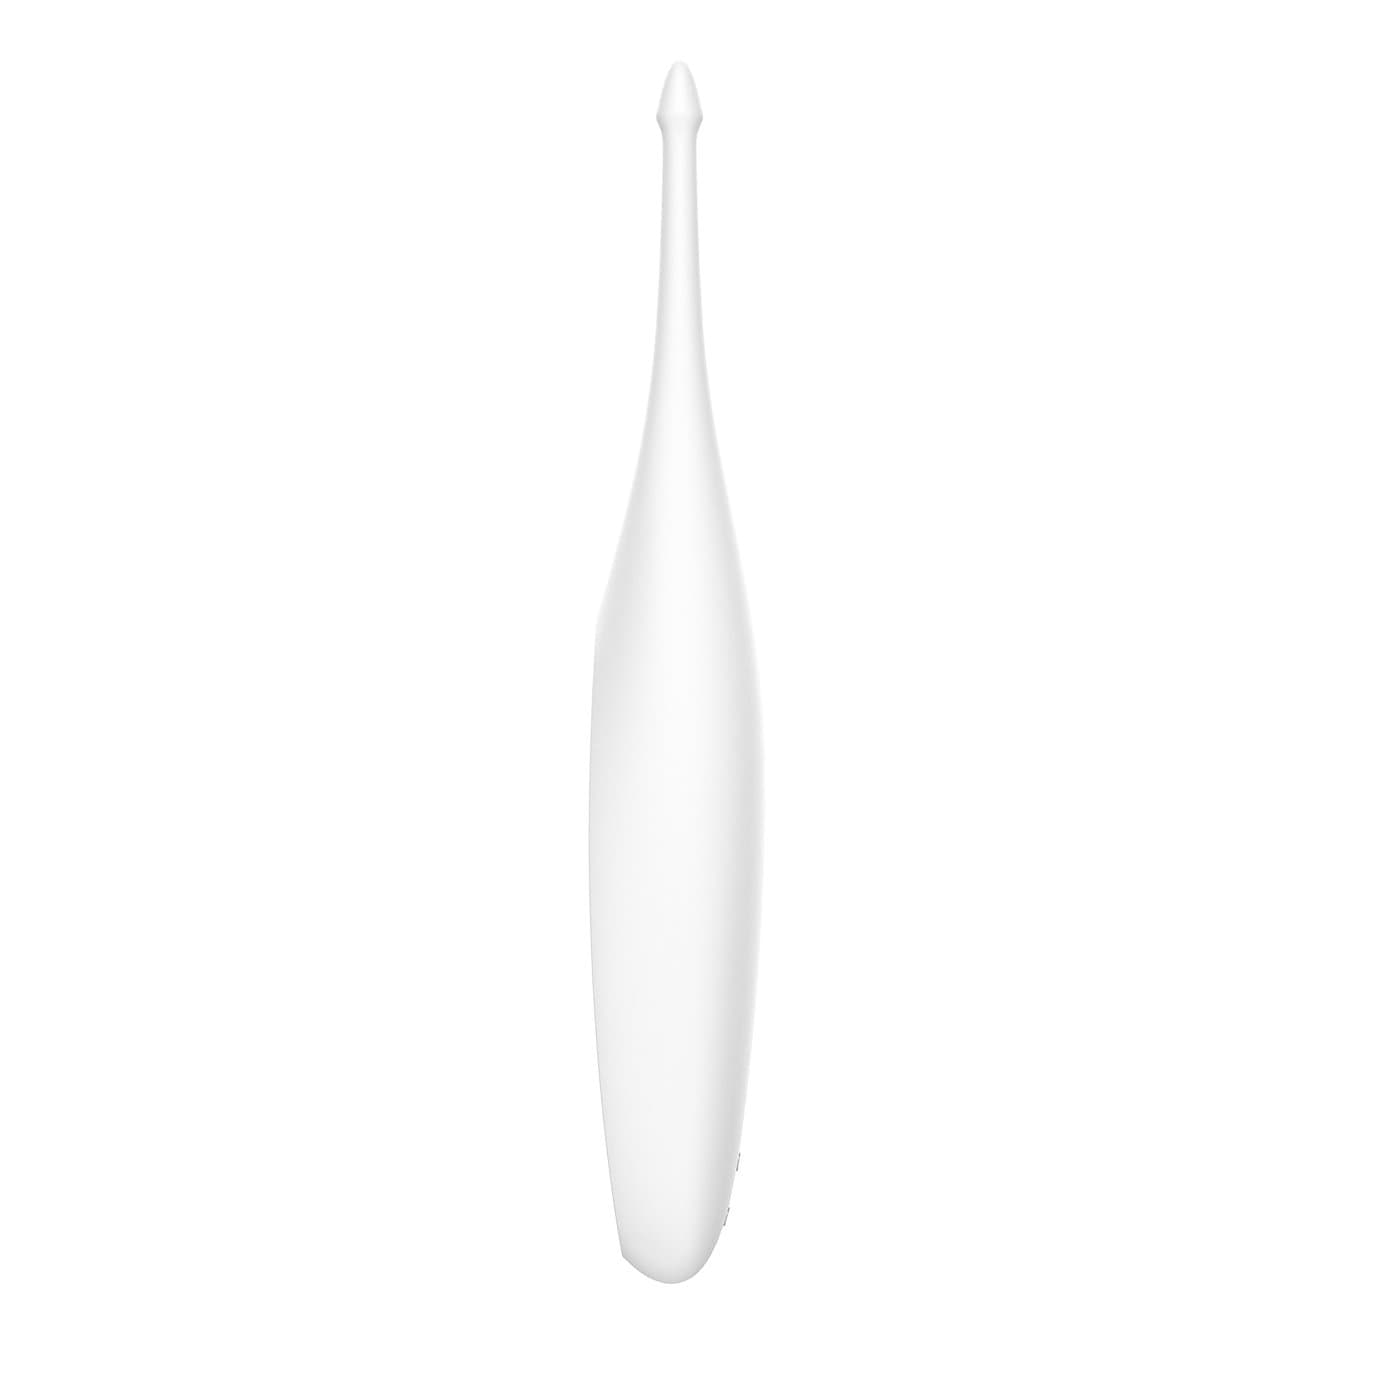 Satisfyer - Twirling Fun Clit Massager (White) Clit Massager (Vibration) Rechargeable 4061504009636 CherryAffairs